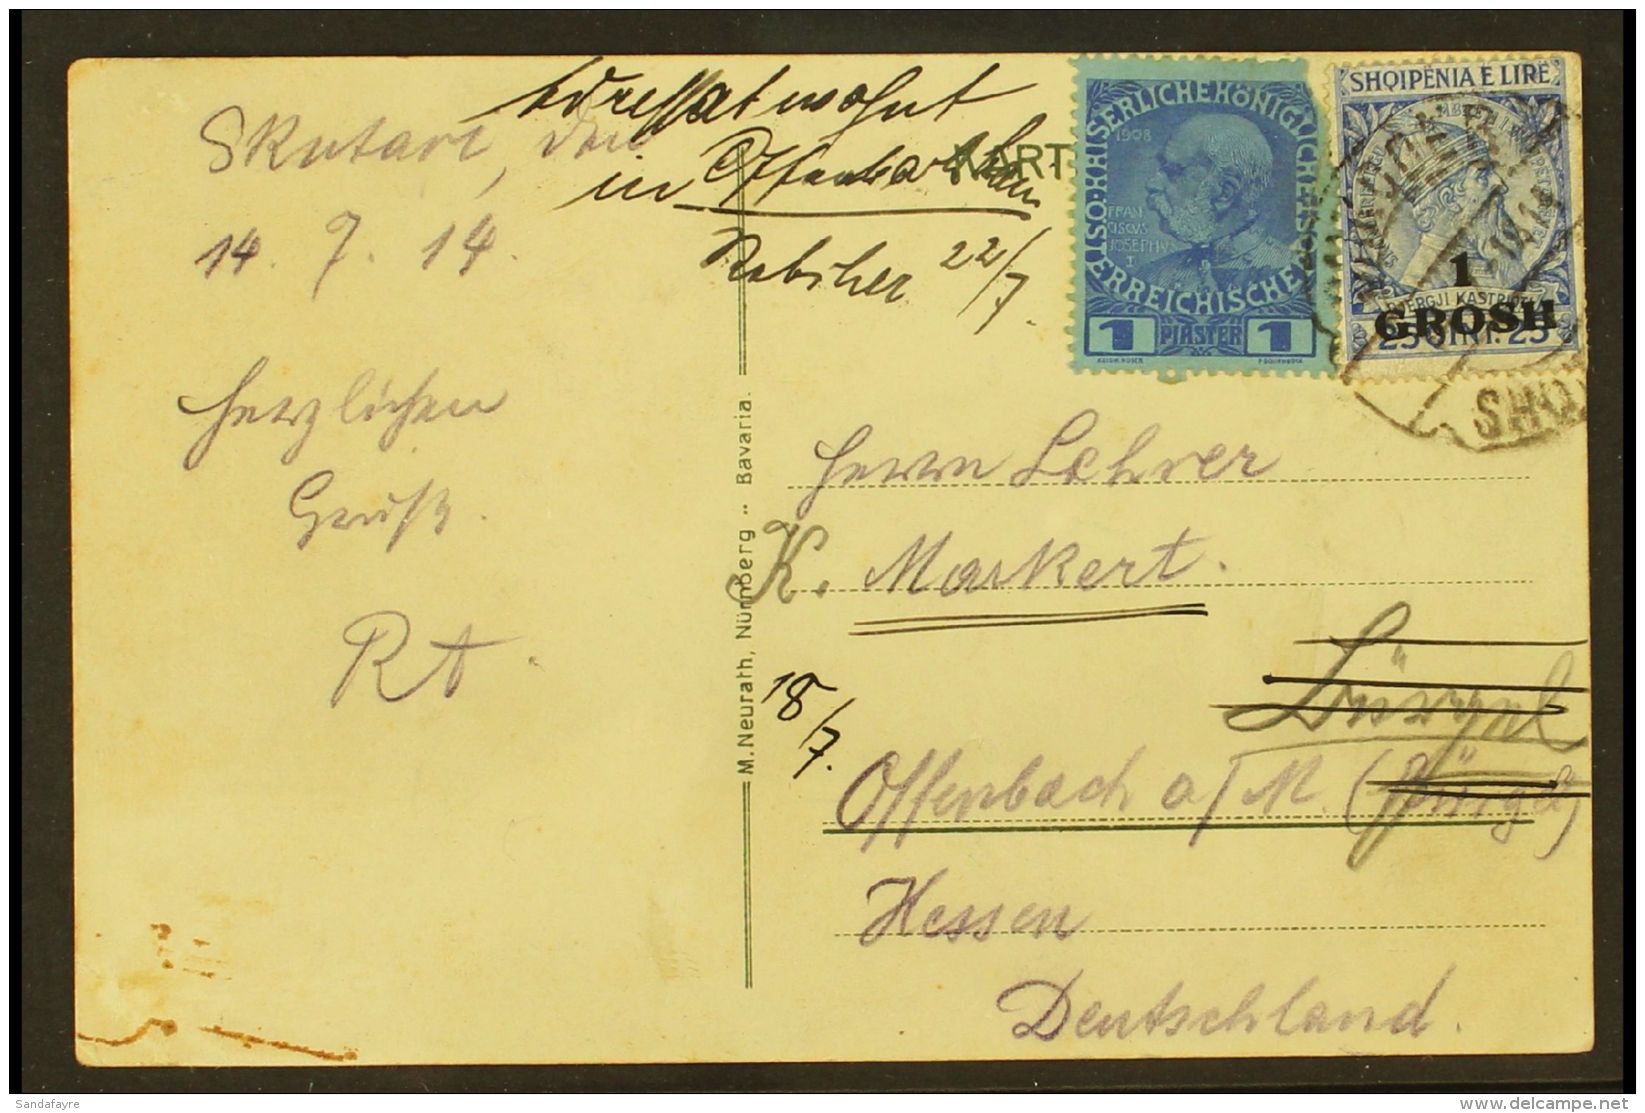 1914 MIXED FRANKING.  (17 July) Picture Postcard To Germany, Redirected, Bearing Austrian PO's In Turkey 1914 1pi... - Albanien